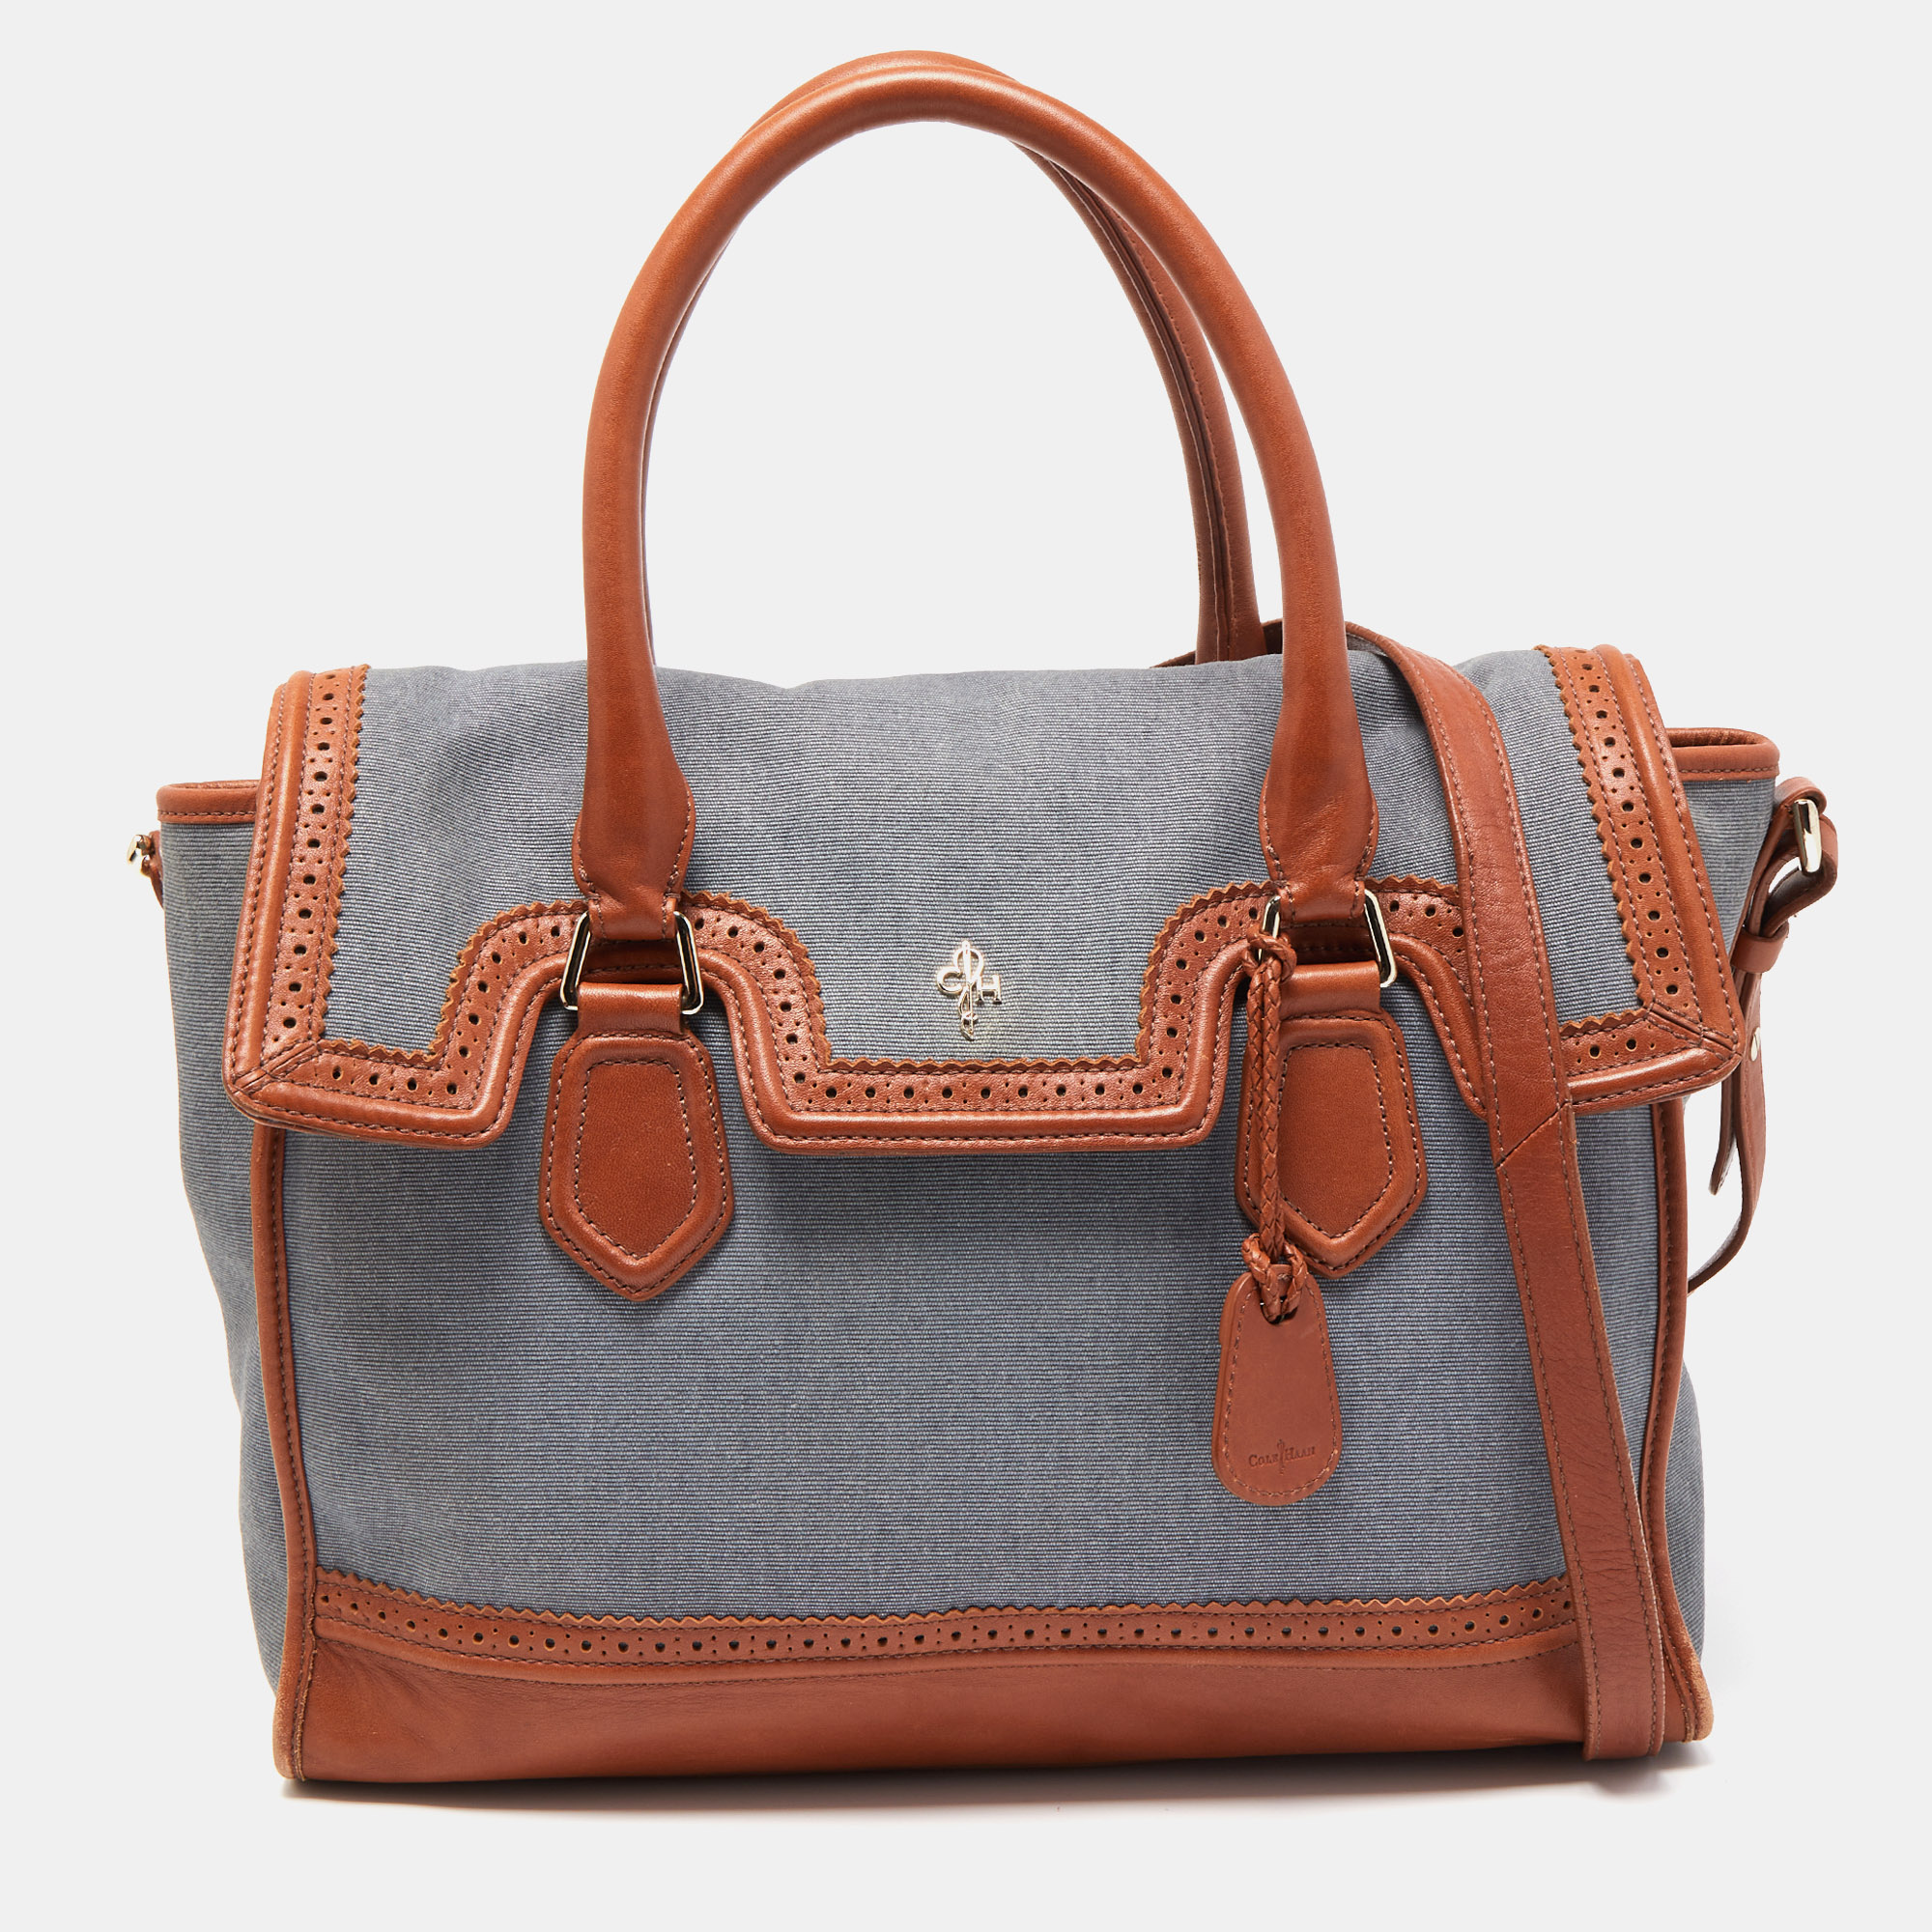 

Cole Haan Blue/Tan Denim and Leather Flap Brooke Tote